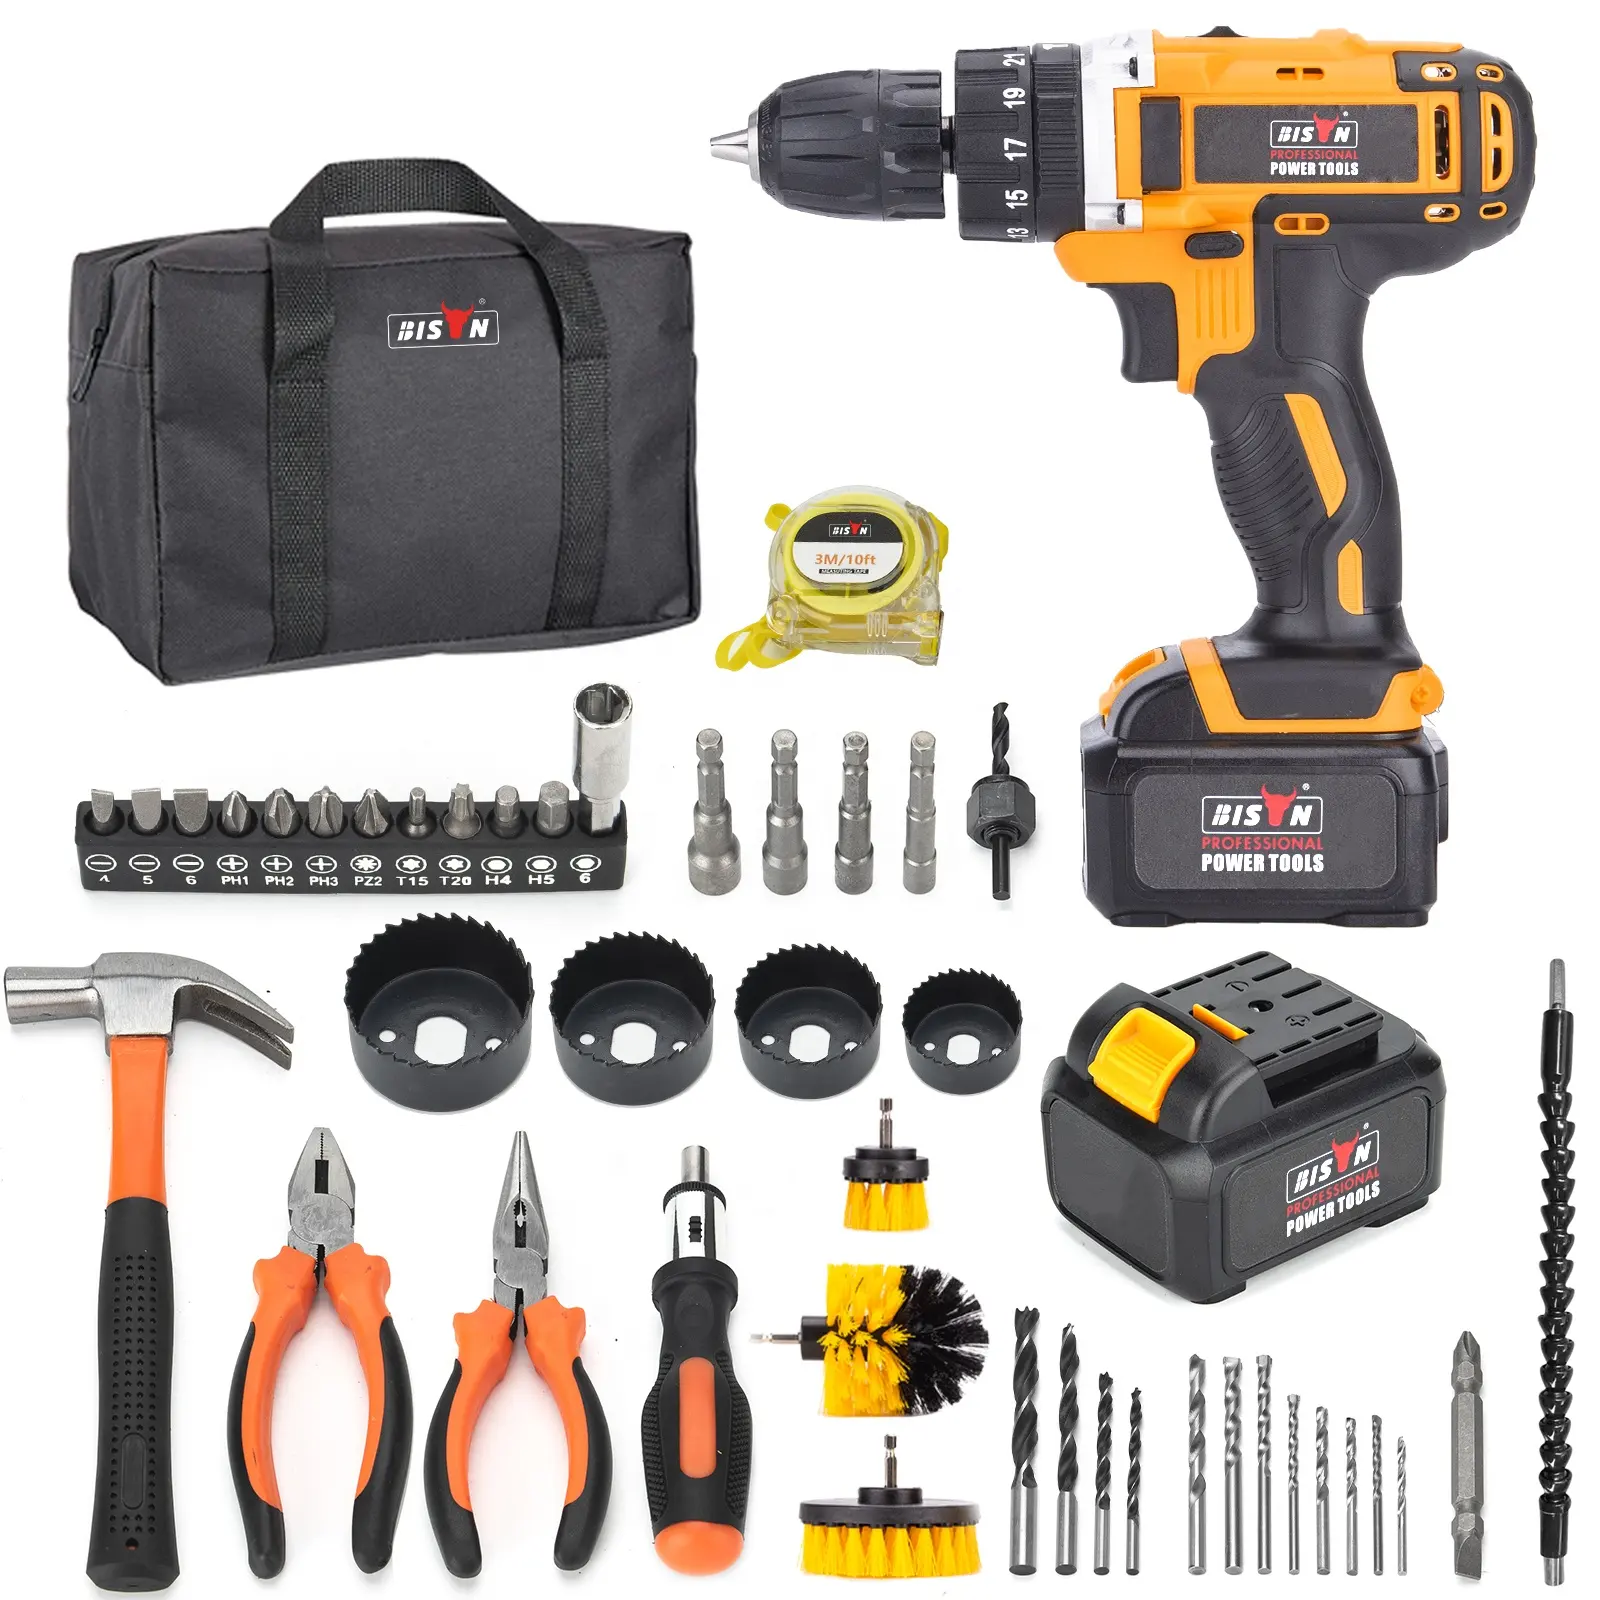 BISON Industrial Drilling Machine Electric Drill Machine Set Woodworking Power Tool Cordless Drill